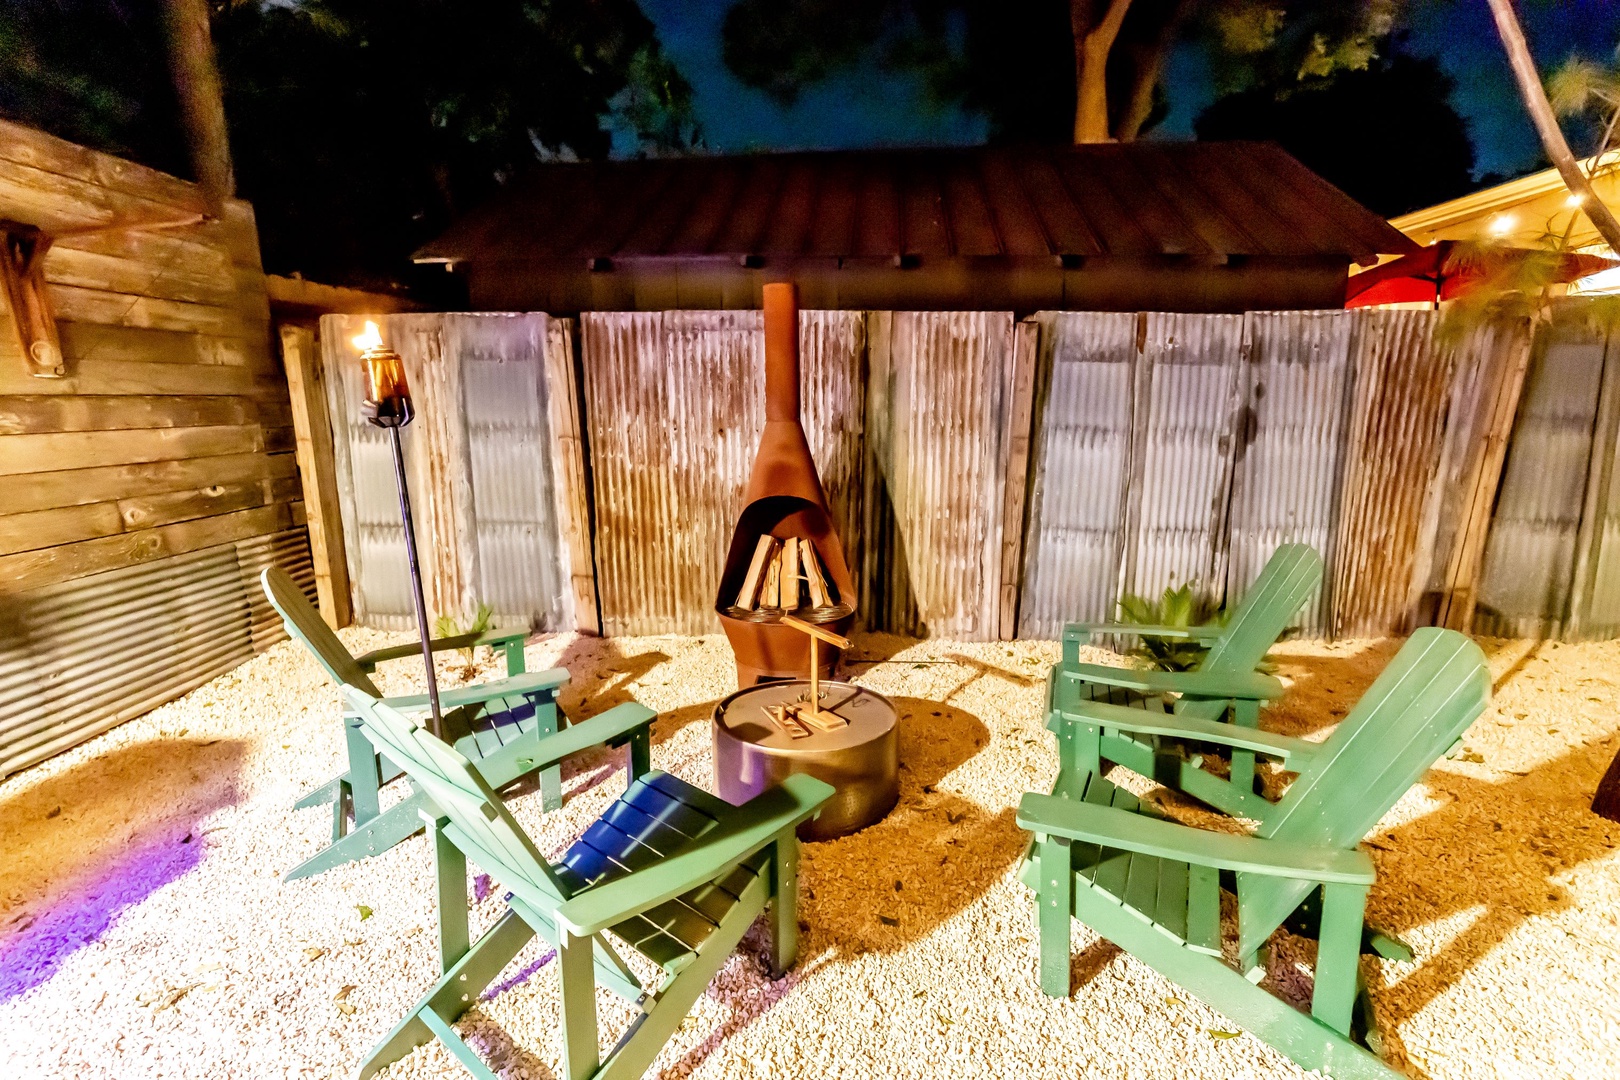 The firepit is an ideal relaxation spot, perfect for hanging out as a group